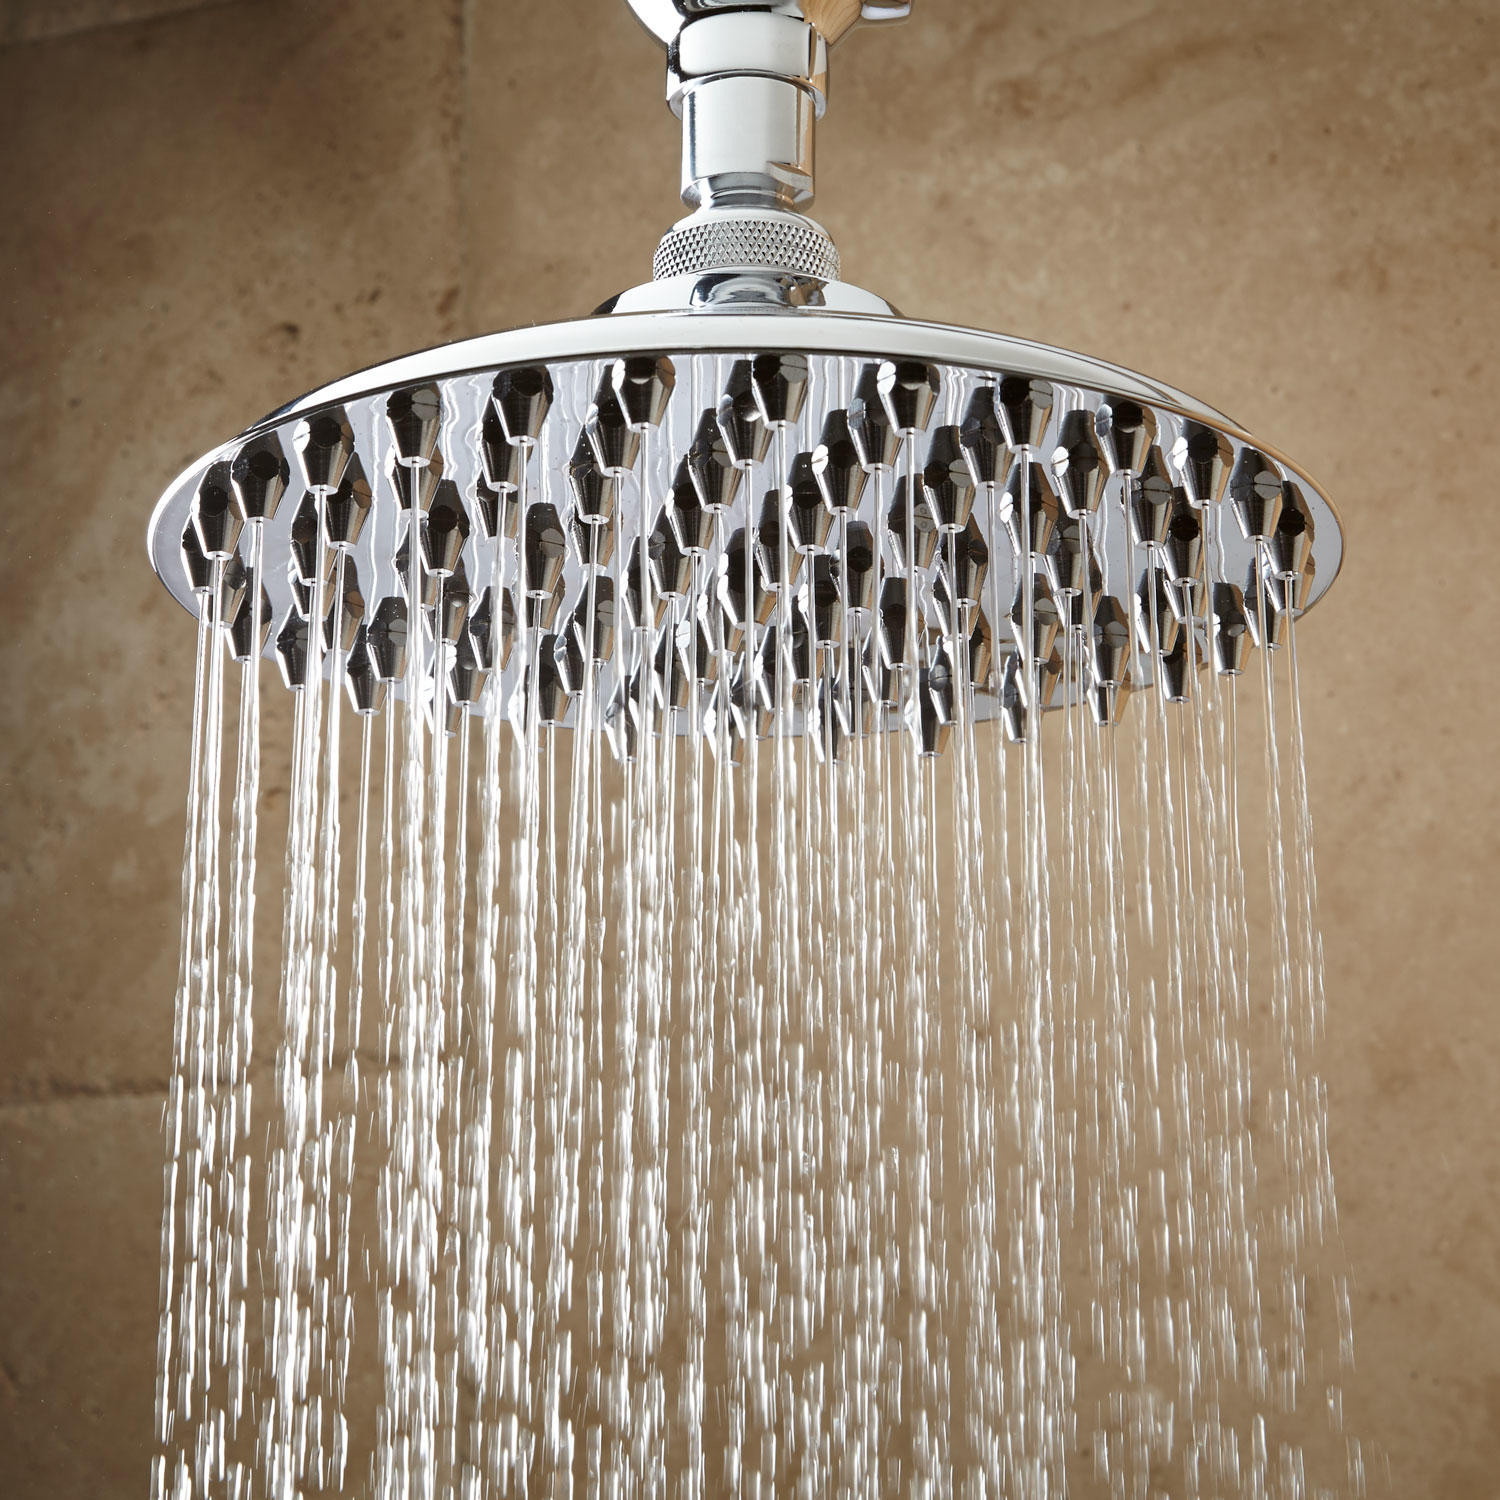 Picture Of Bathroom Showers
 Bostonian Rainfall Nozzle Shower Head With Ornate Arm